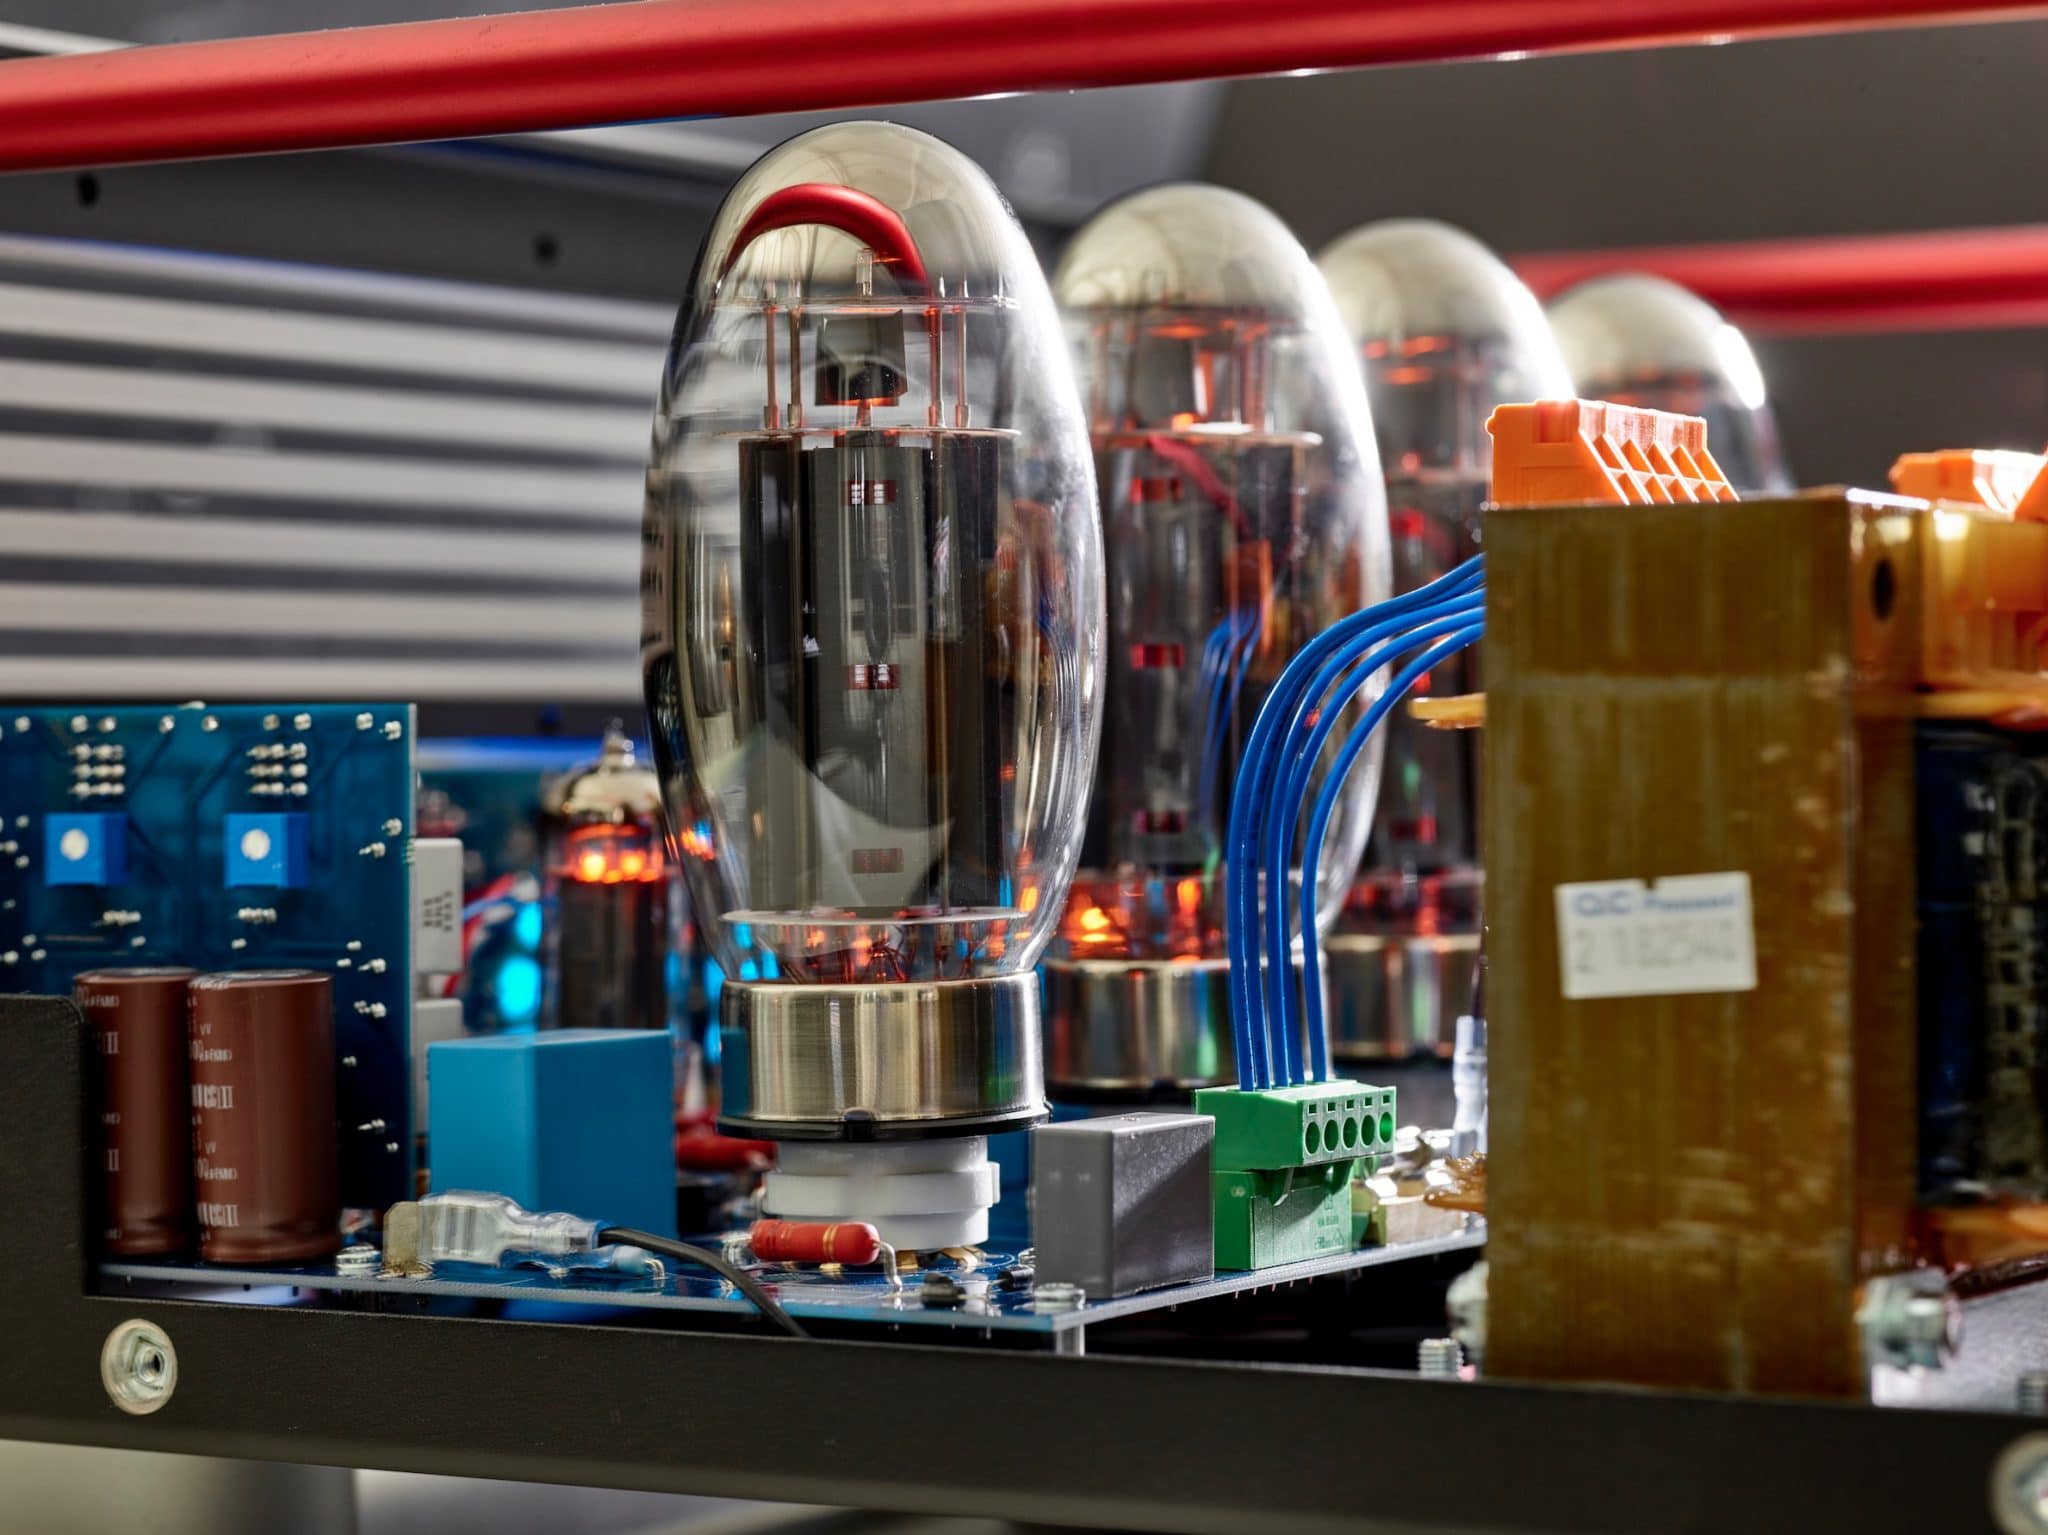 CTA408 Integrated Amplifier From Copland